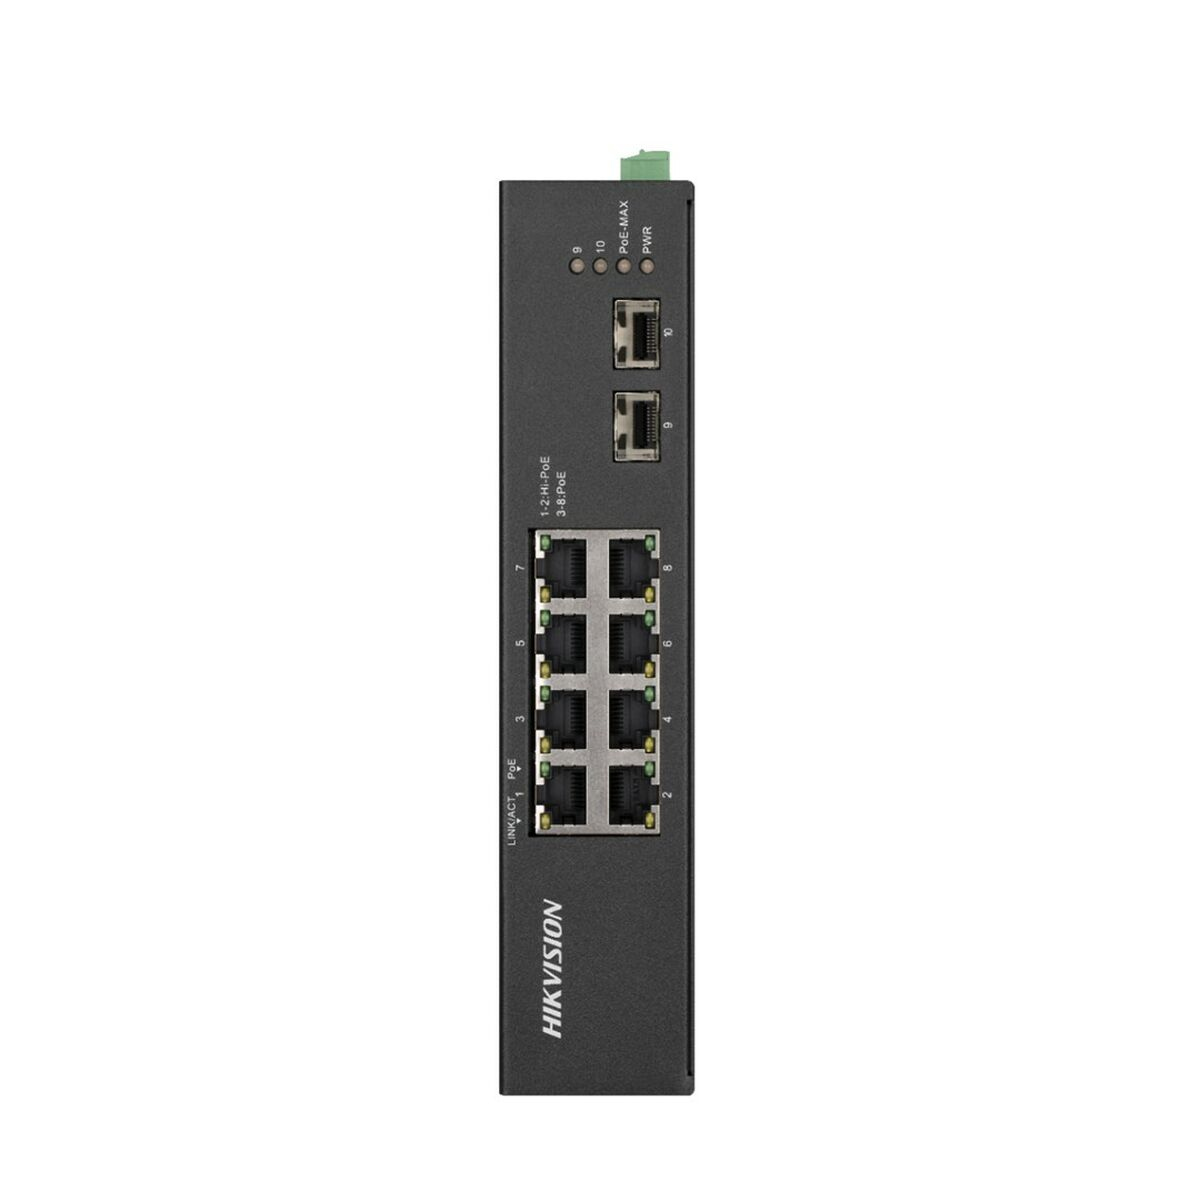 HIKVISION PoE-Switch mit 8 Ports DS-3T0510HP-E/HS Switch